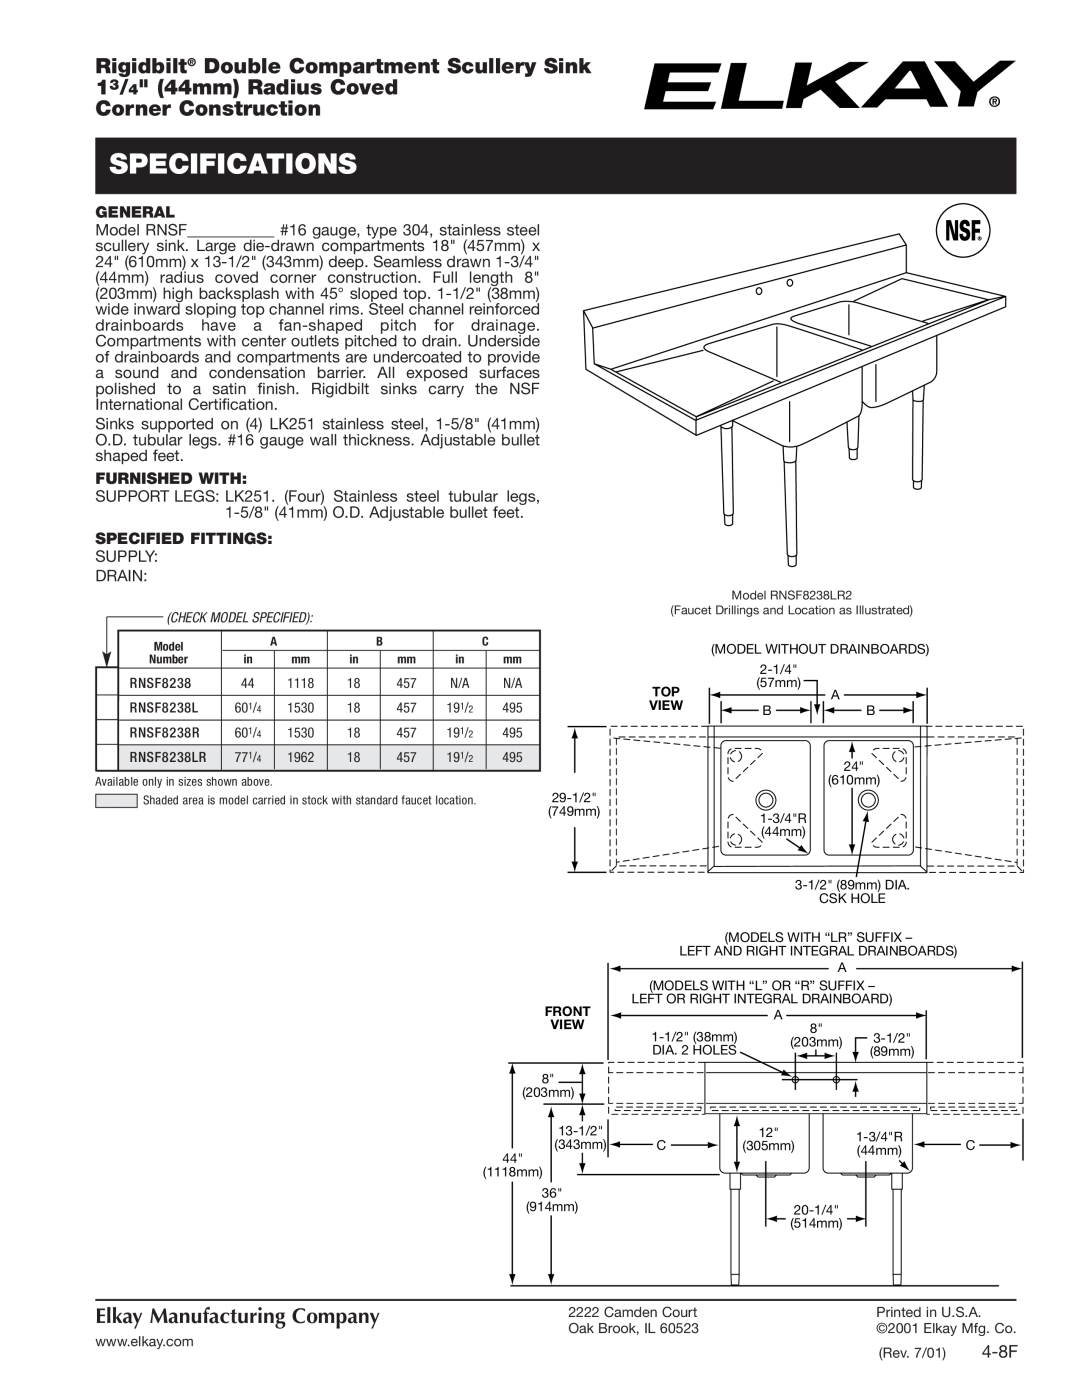 Elkay RNSF8238R specifications Specifications, Rigidbilt Double Compartment Scullery Sink, 13/4 44mm Radius Coved, 4-8F 